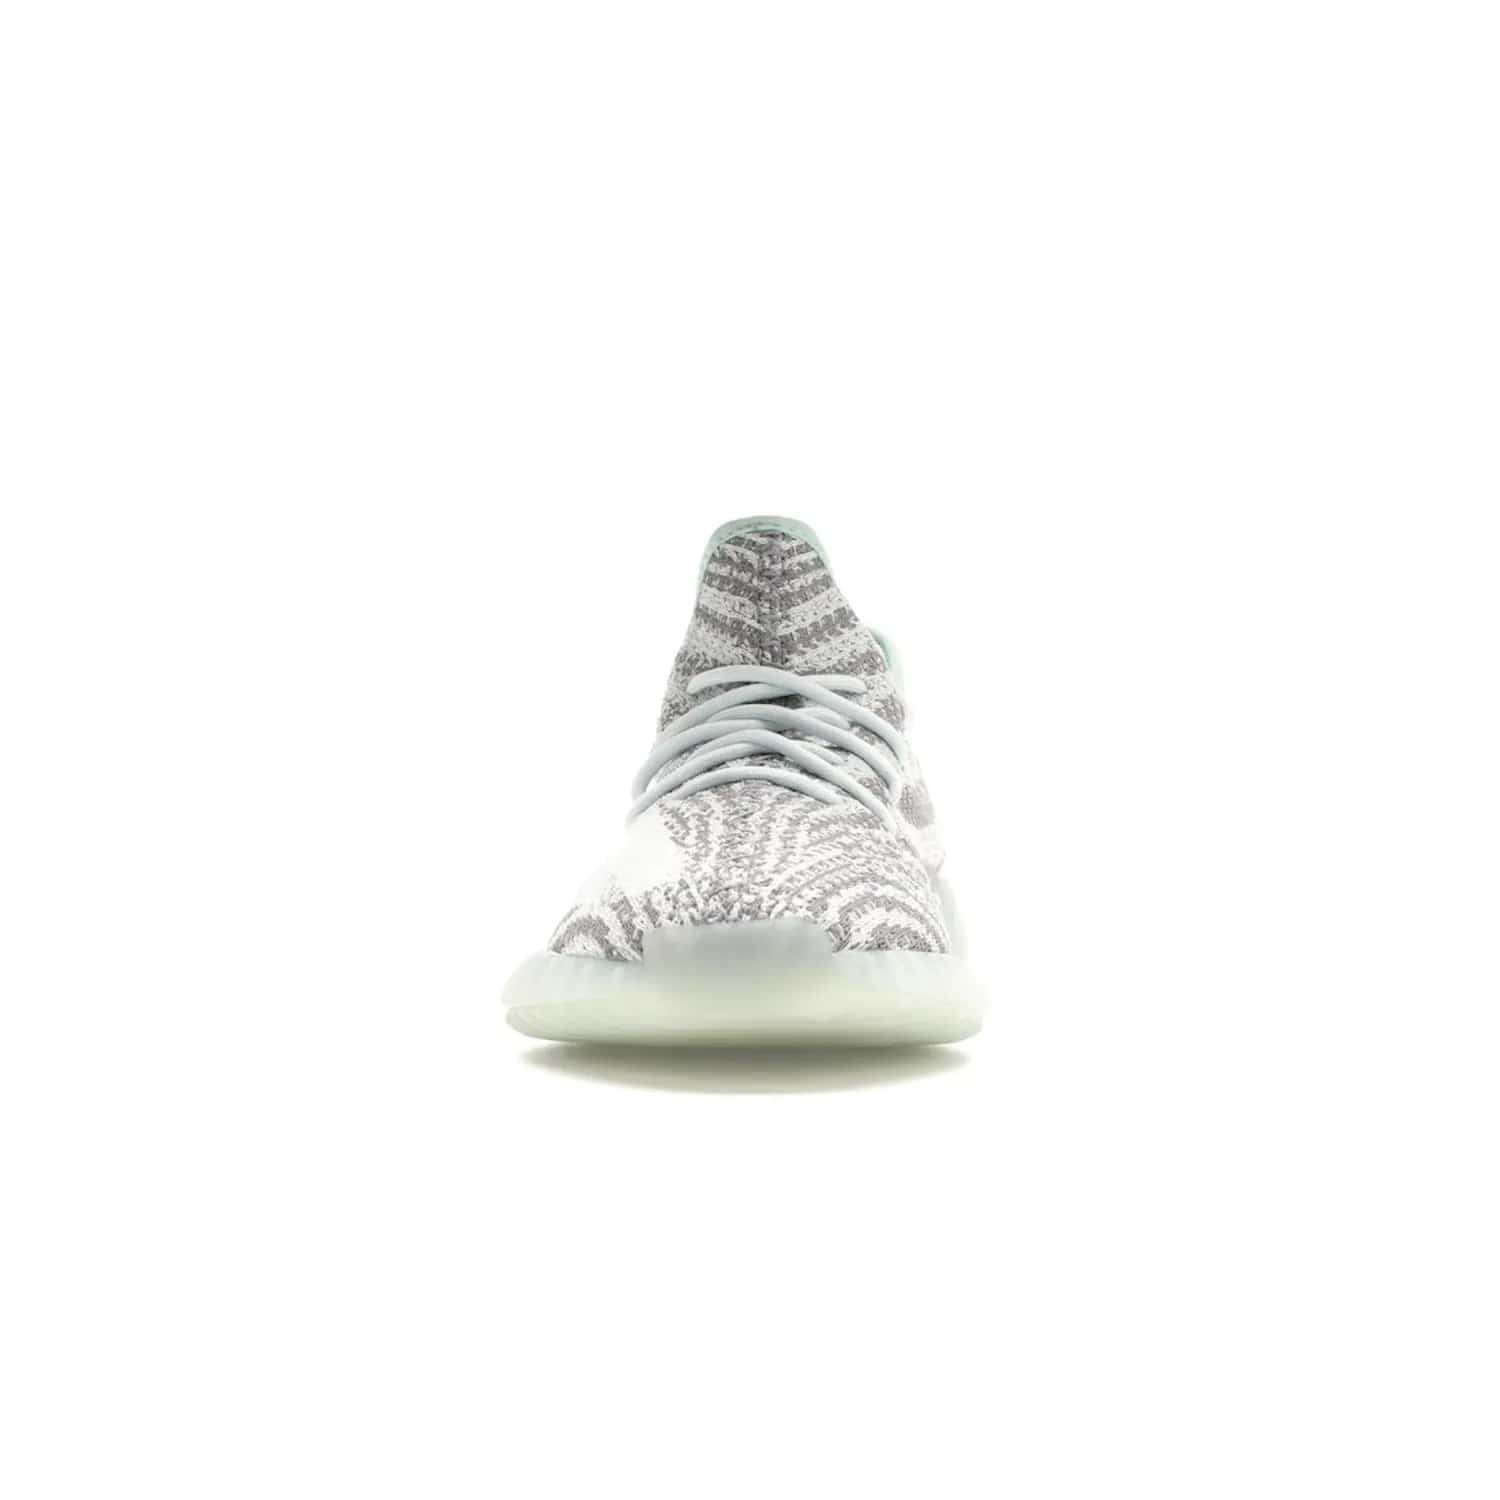 adidas Yeezy Boost 350 V2 Blue Tint - Image 11 - Only at www.BallersClubKickz.com - The adidas Yeezy Boost 350 V2 Blue Tint merges fashion and functionality with its Primeknit upper and Boost sole. Released in December 2017, this luxurious sneaker is perfect for making a stylish statement.